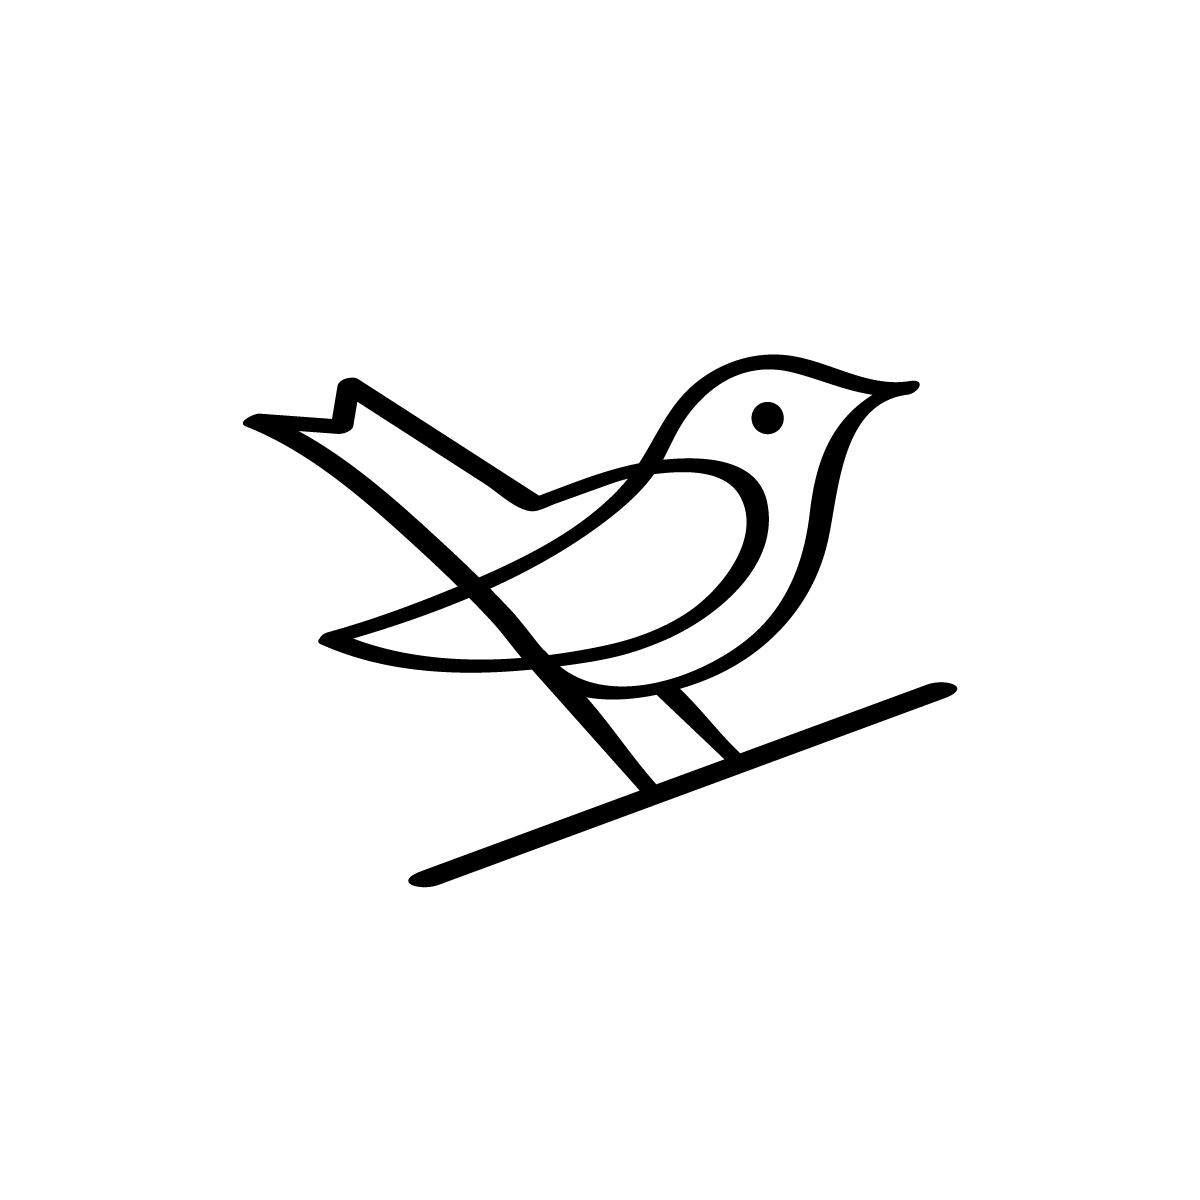 Monoline logo featuring a nightingale bird, ideal for music-related businesses like recording studios or singing teachers.